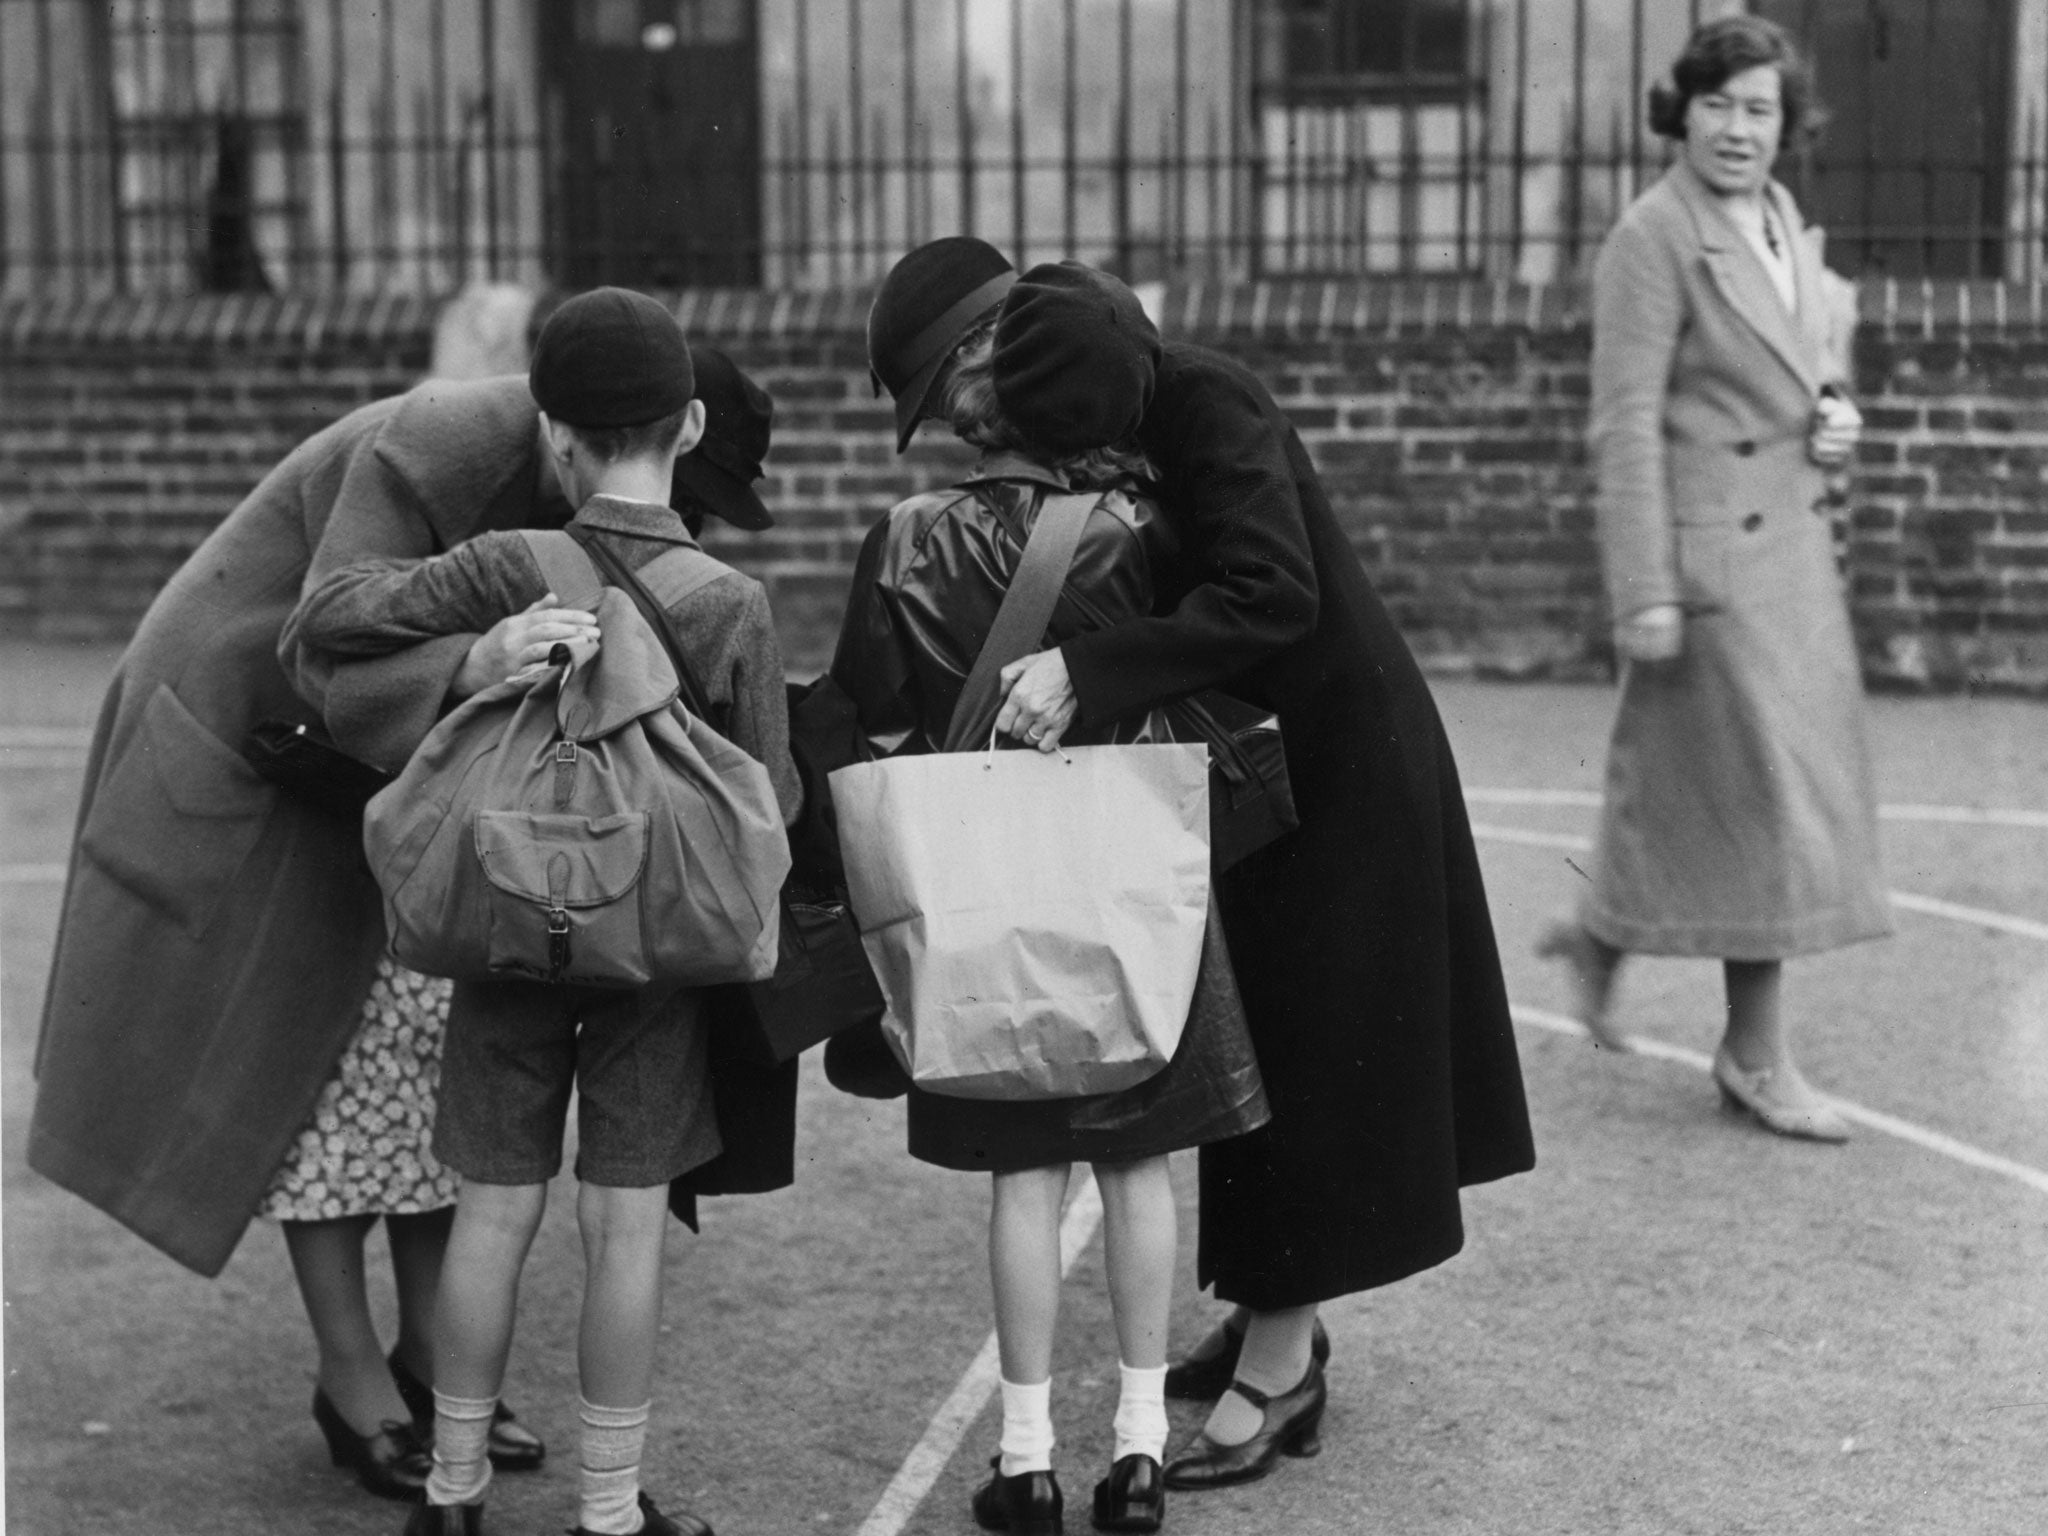 Kissing their children goodbye at St George's School, Notting Hill Gate, London, 1939